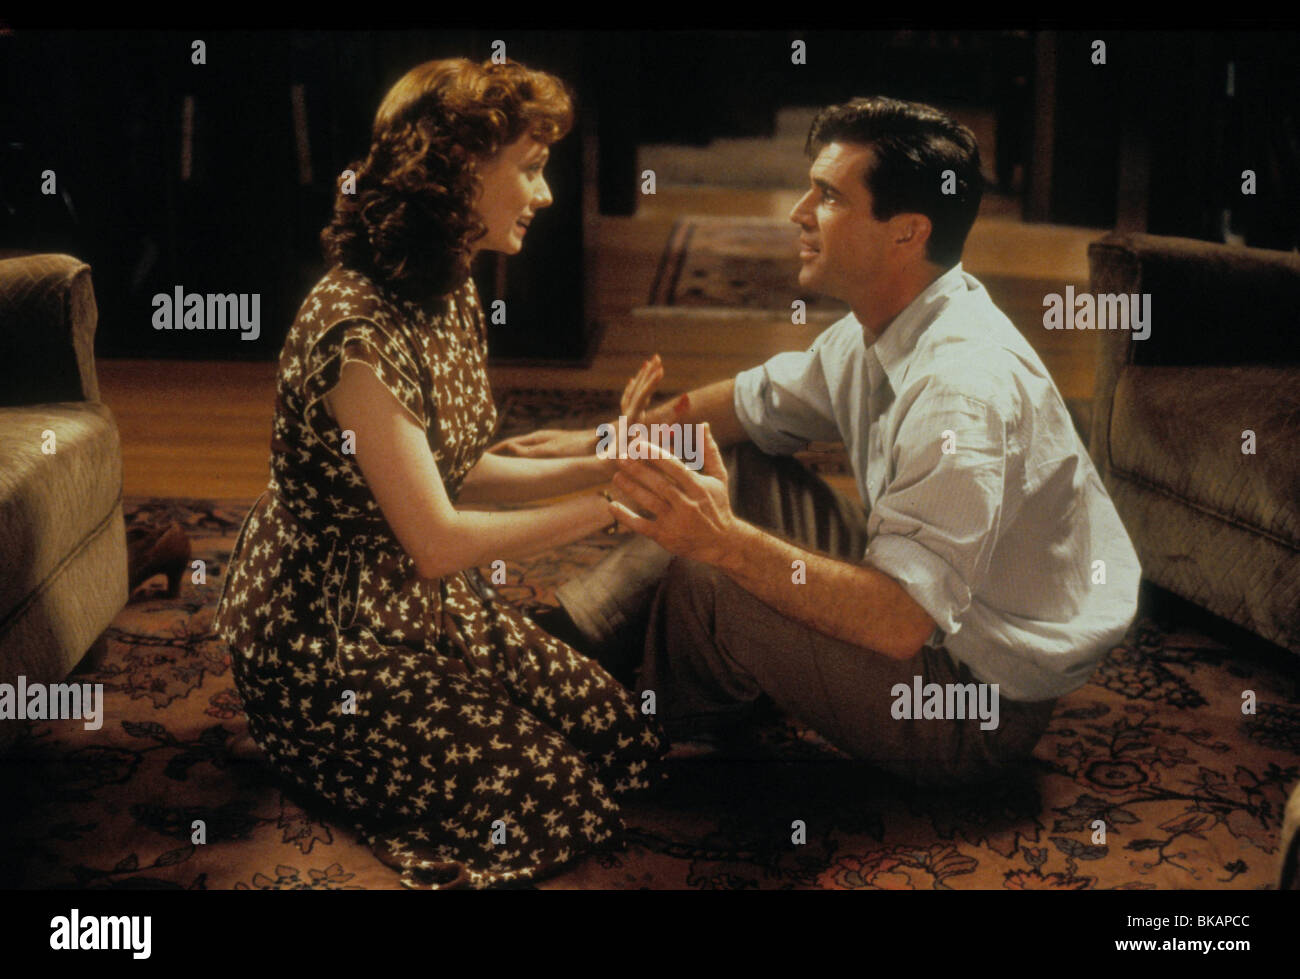 FOREVER YOUNG (1992) ISABEL GLASSER, MEL GIBSON FVYN 028 MOVIESTORE COLLECTION LTD Stock Photo